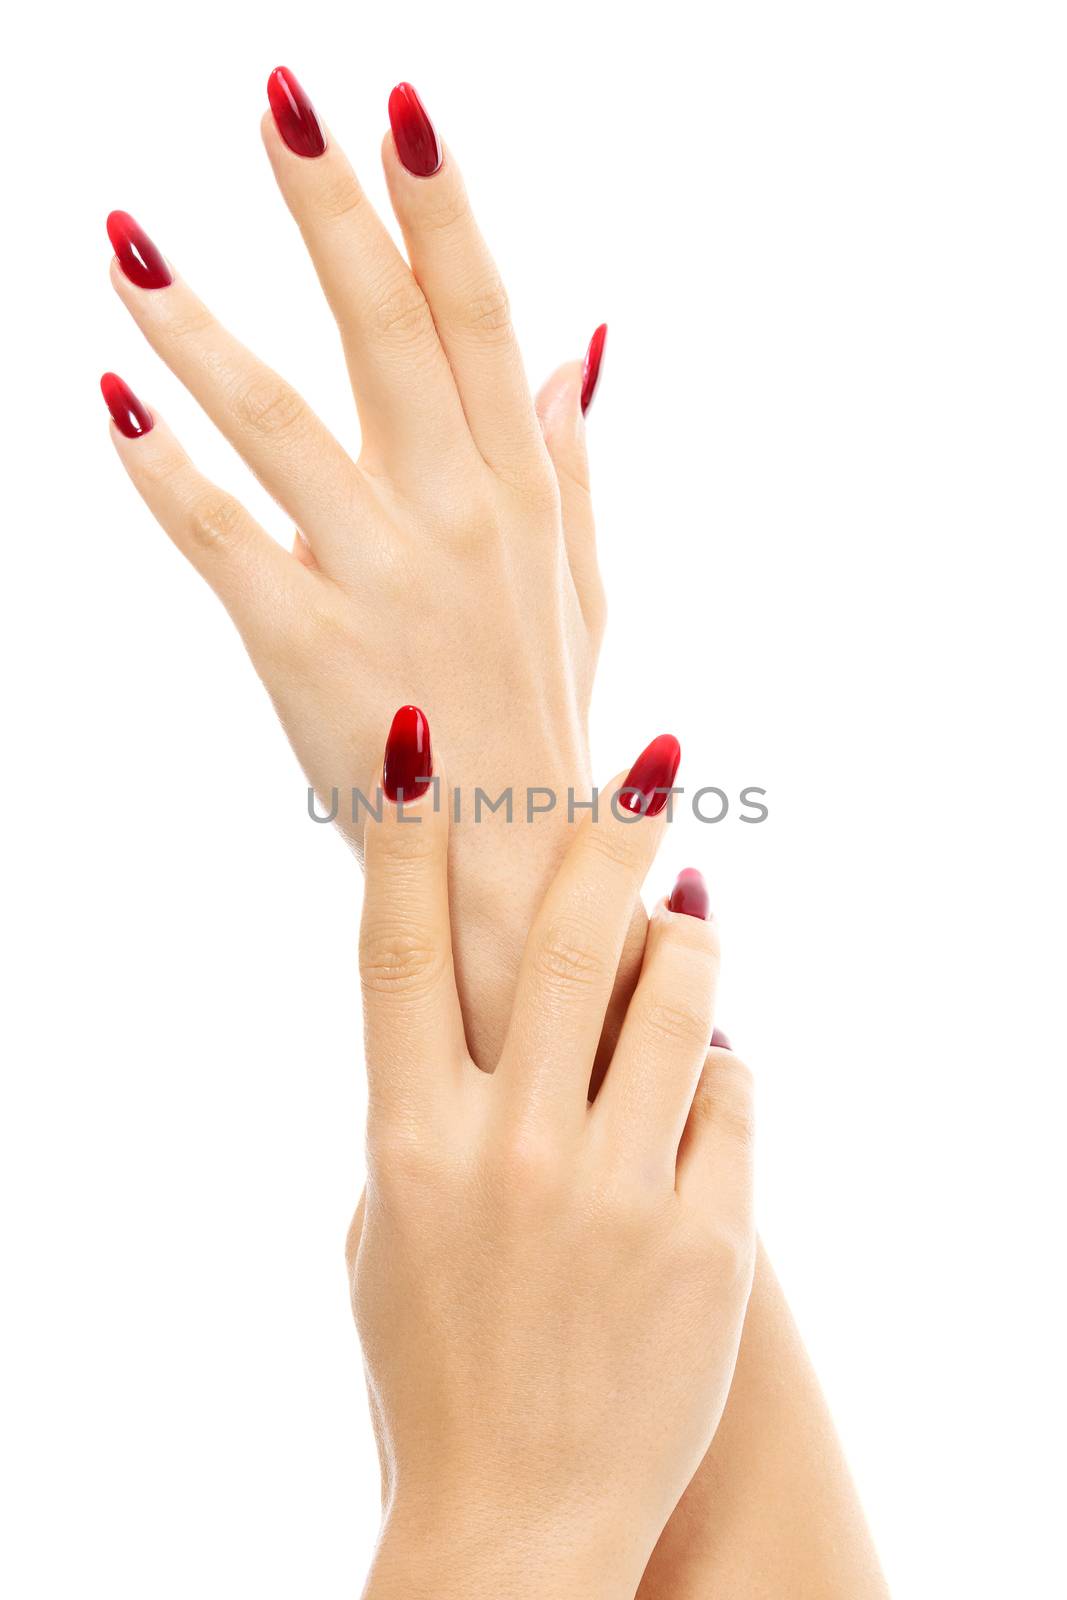 Female hands with red fingernails, white background, isolated